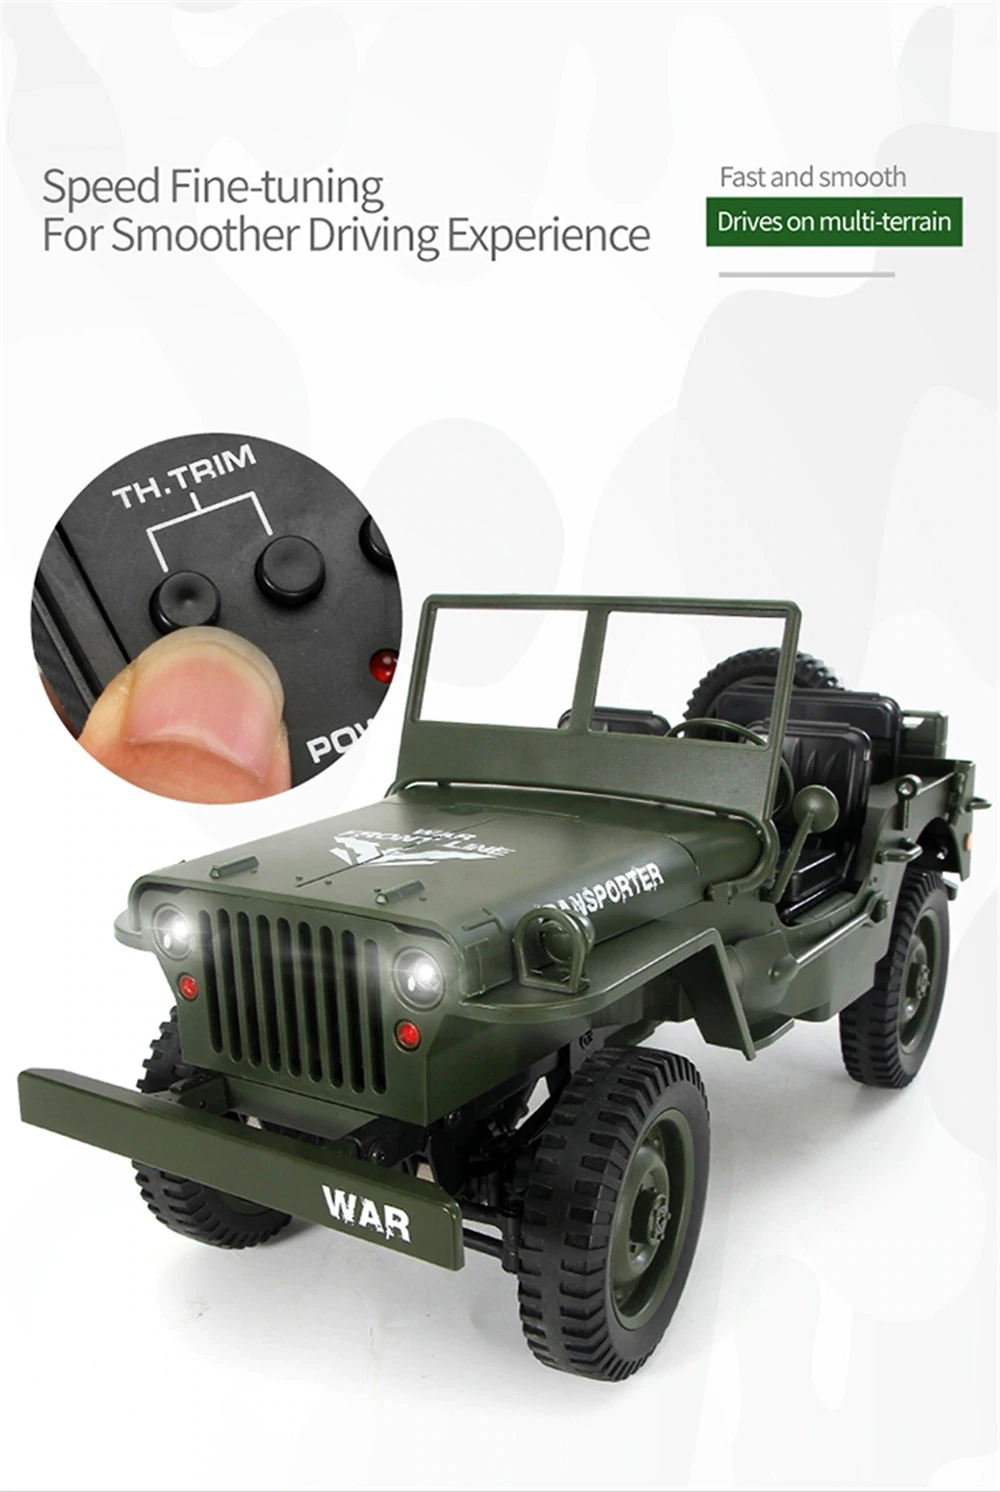 JJRC Q65 1/10 2.4Ghz Open Car RC Off-road Military Jeep 4WD Rock Crawler Toy RTR 